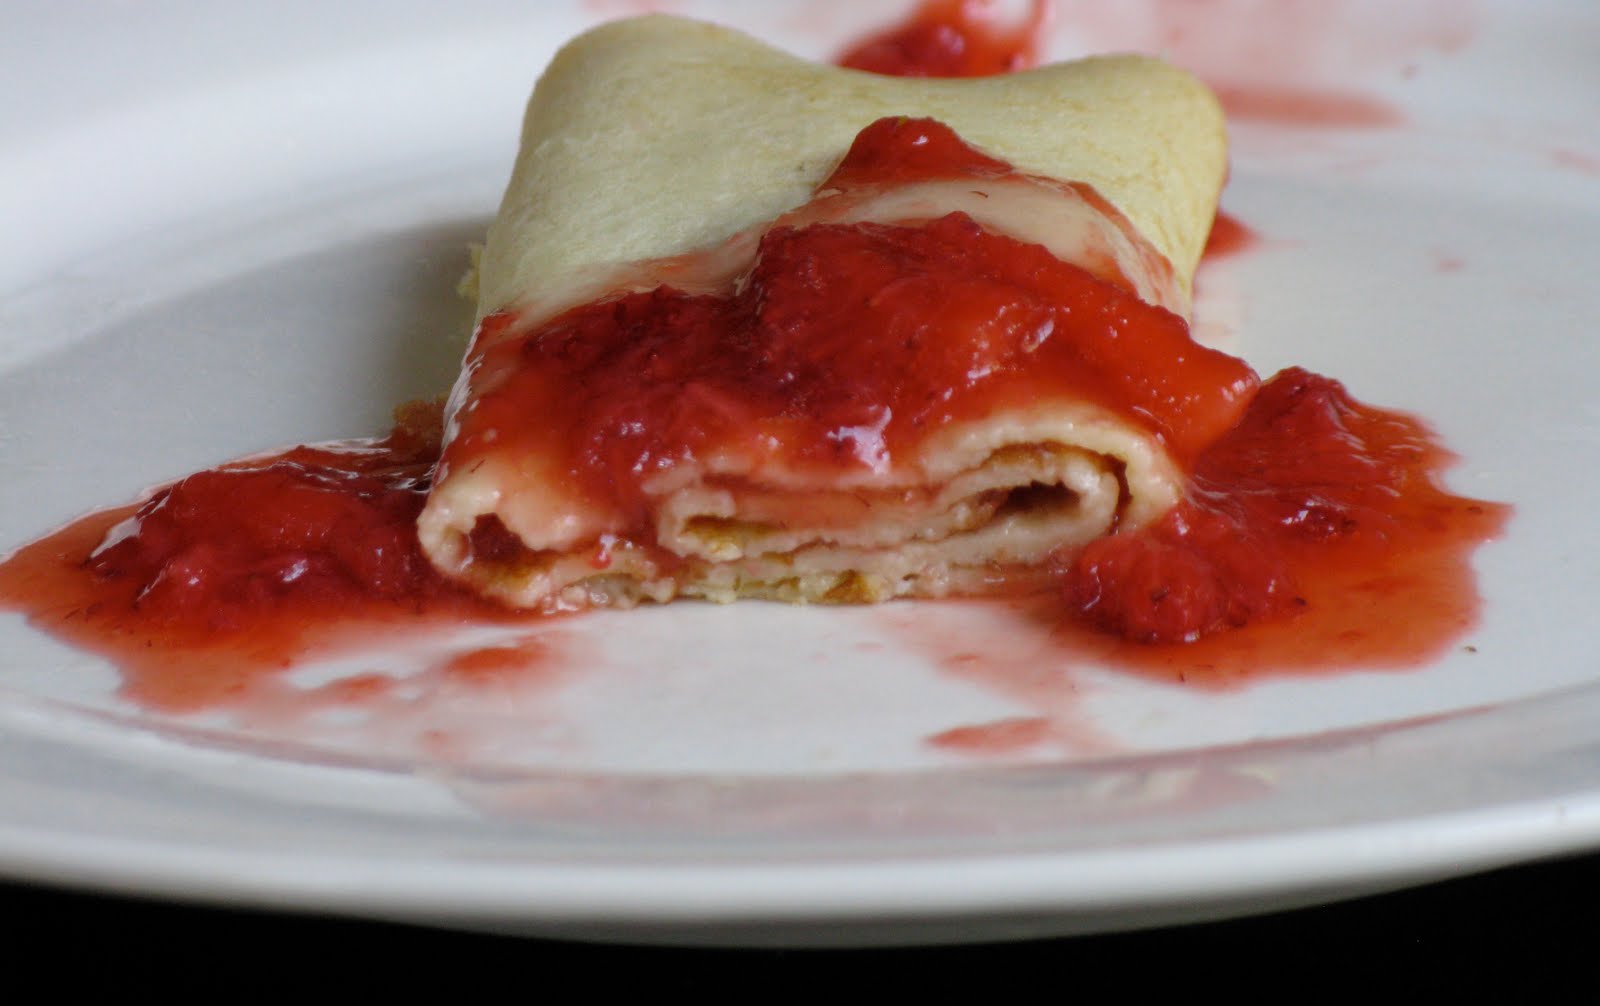 Crepes jemima how with Strawberry Cilantropist: like pancakes The make to  aunt Fresh Jam